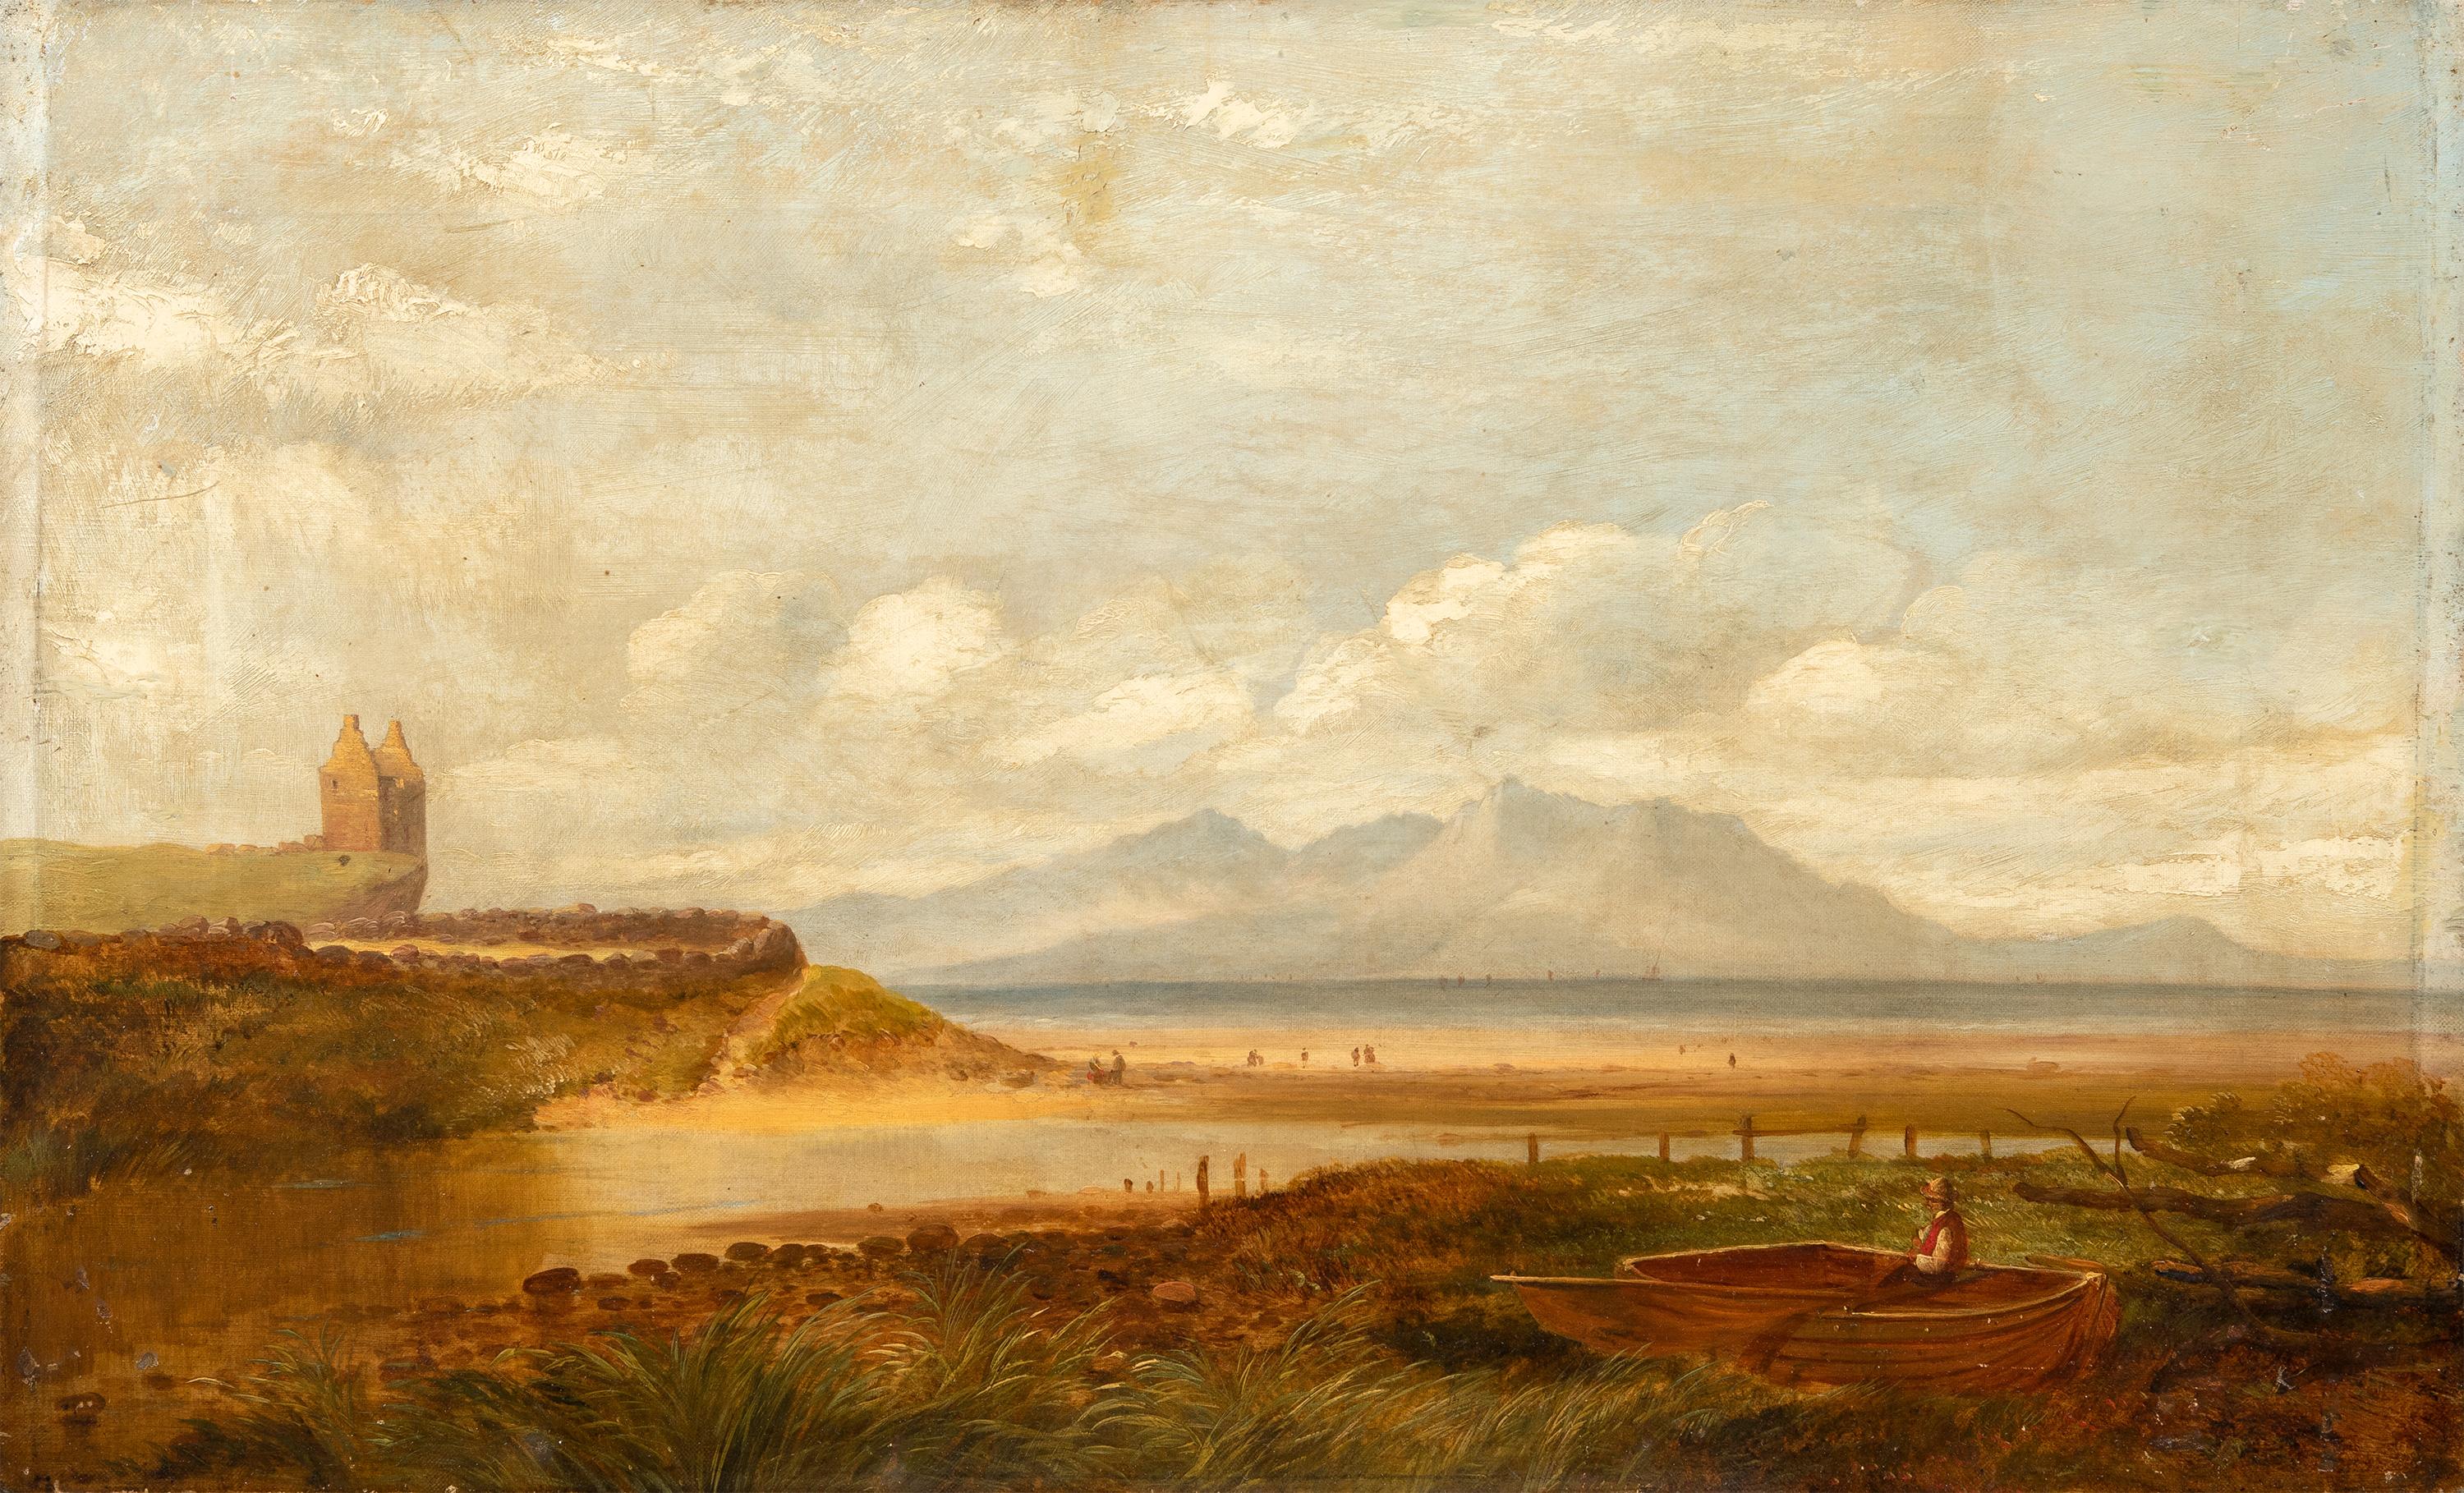 Unknown Figurative Painting - Romantic British painter - 19th century landscape painting - Sea - Oil on canvas